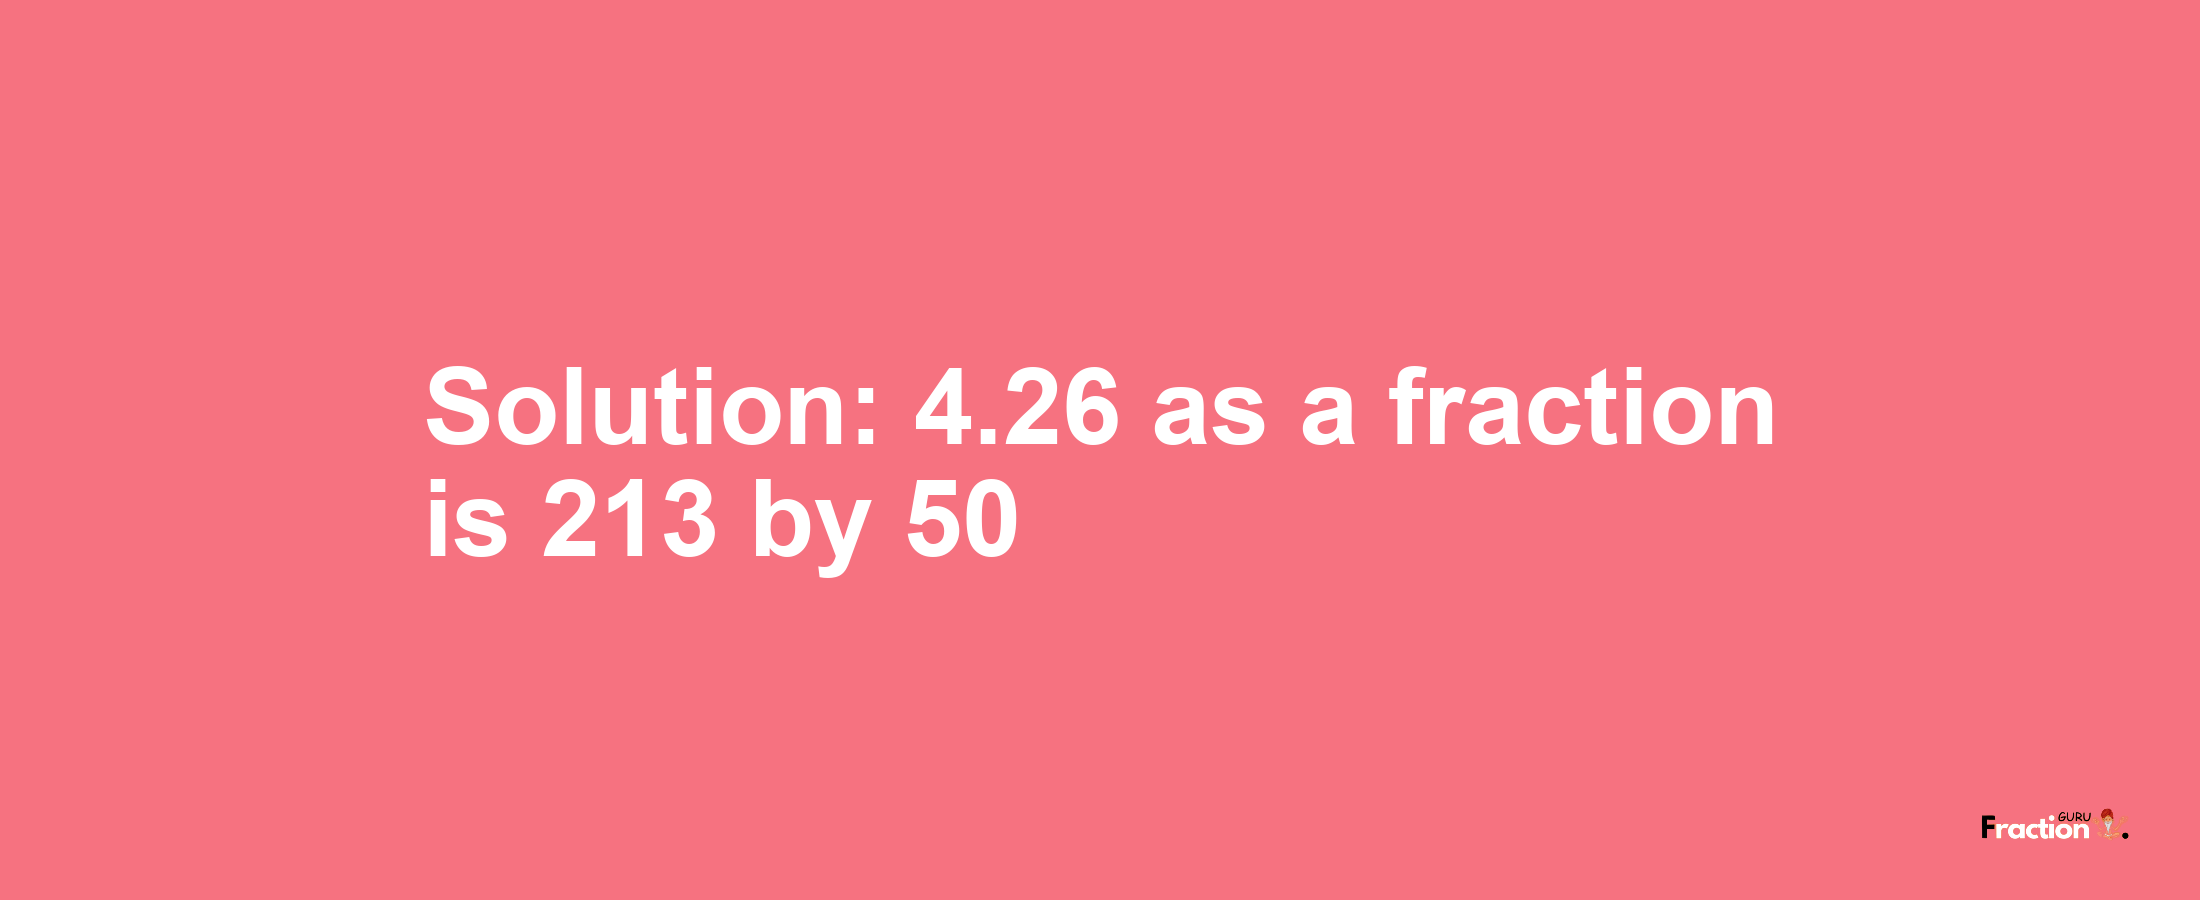 Solution:4.26 as a fraction is 213/50